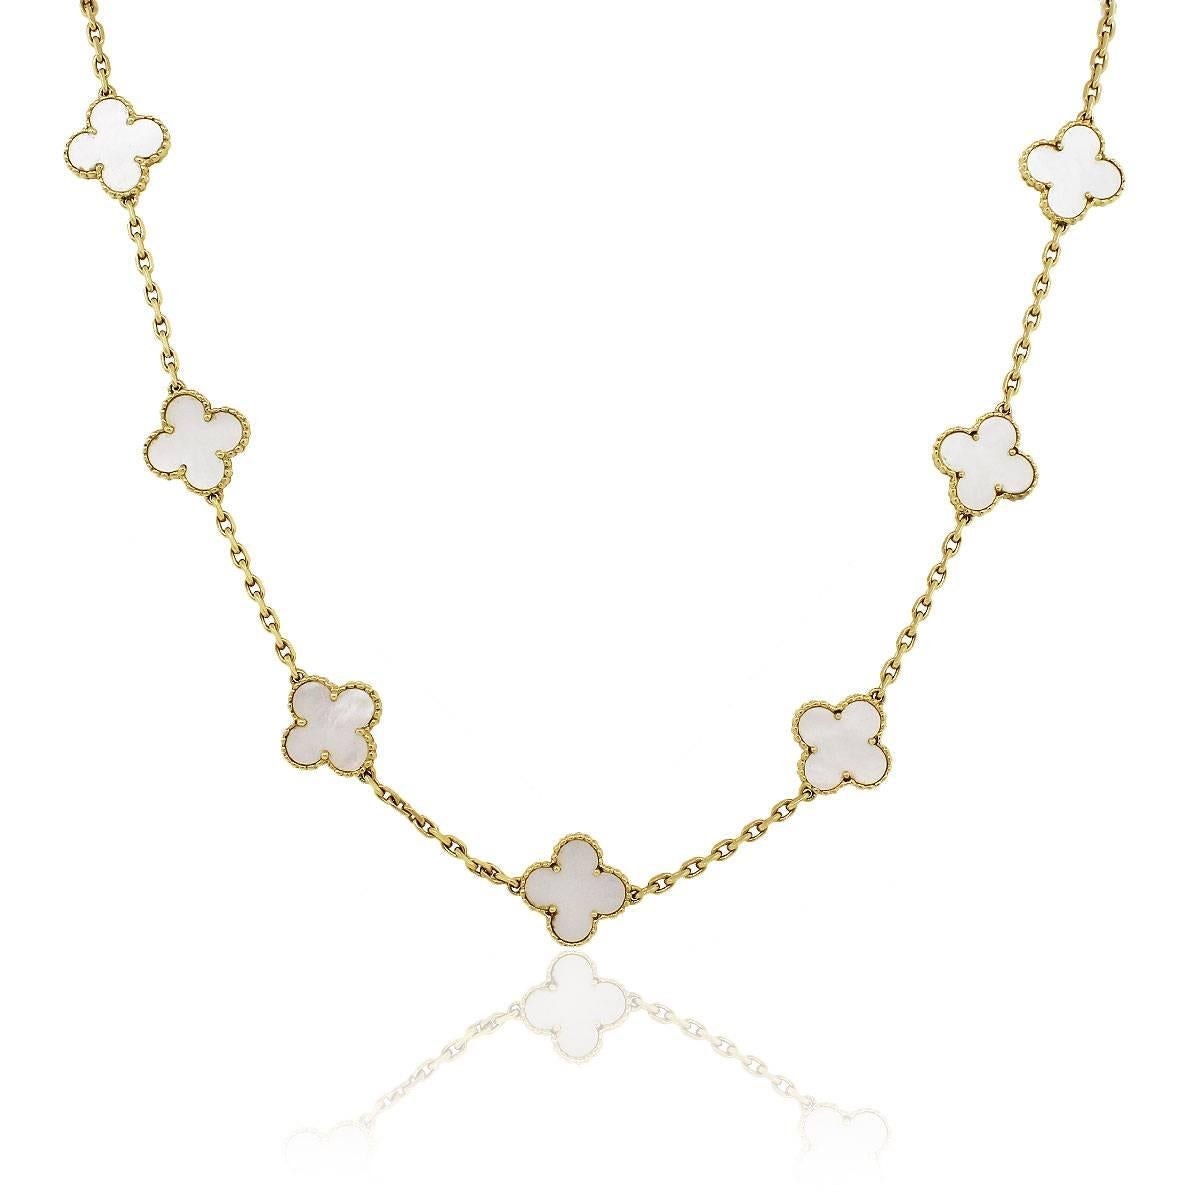 Material: 18k Yellow gold
Gemstone Details: 20 mother of pearl motifs
Necklace Measurements: 33″” in length
Clasp: Lobster claw
Total Weight: 43.4g (27.9dwt)
Additional Details: This item comes with Van Cleef & Arpels box and original papers!